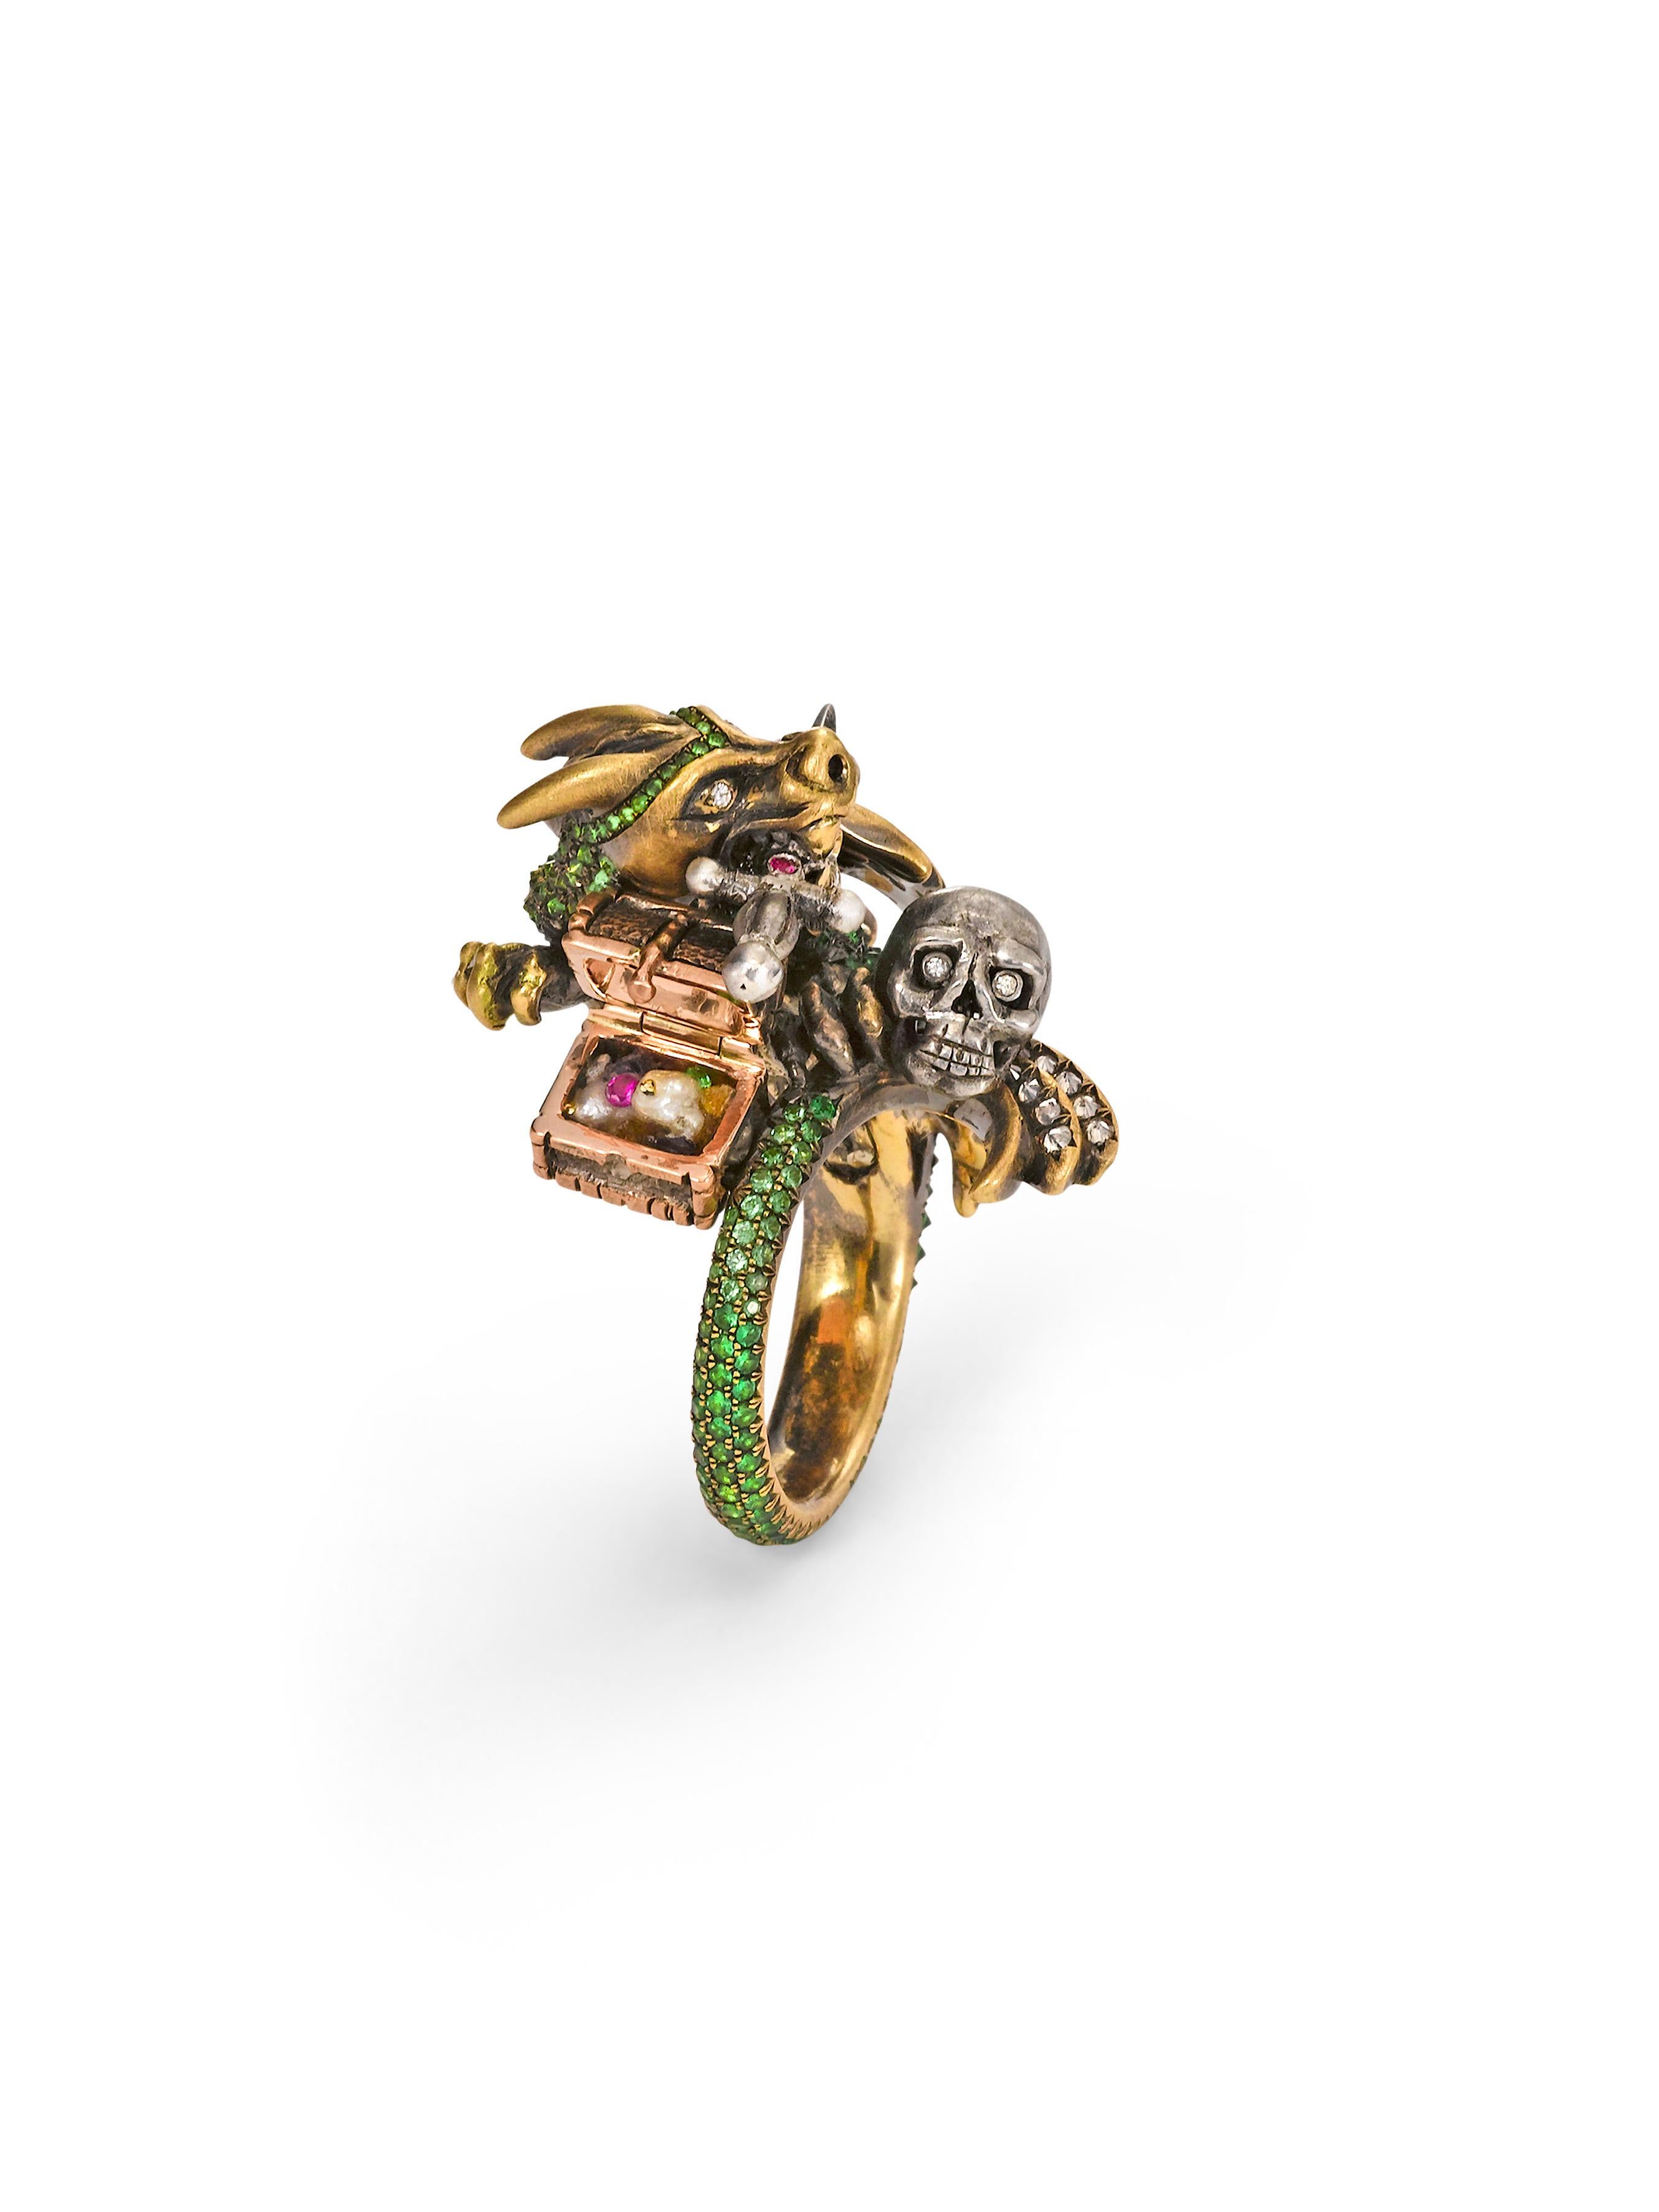 Wendy Brandes 7-Ring Diamond and Colored Gemstone Animal-Design Collection 10